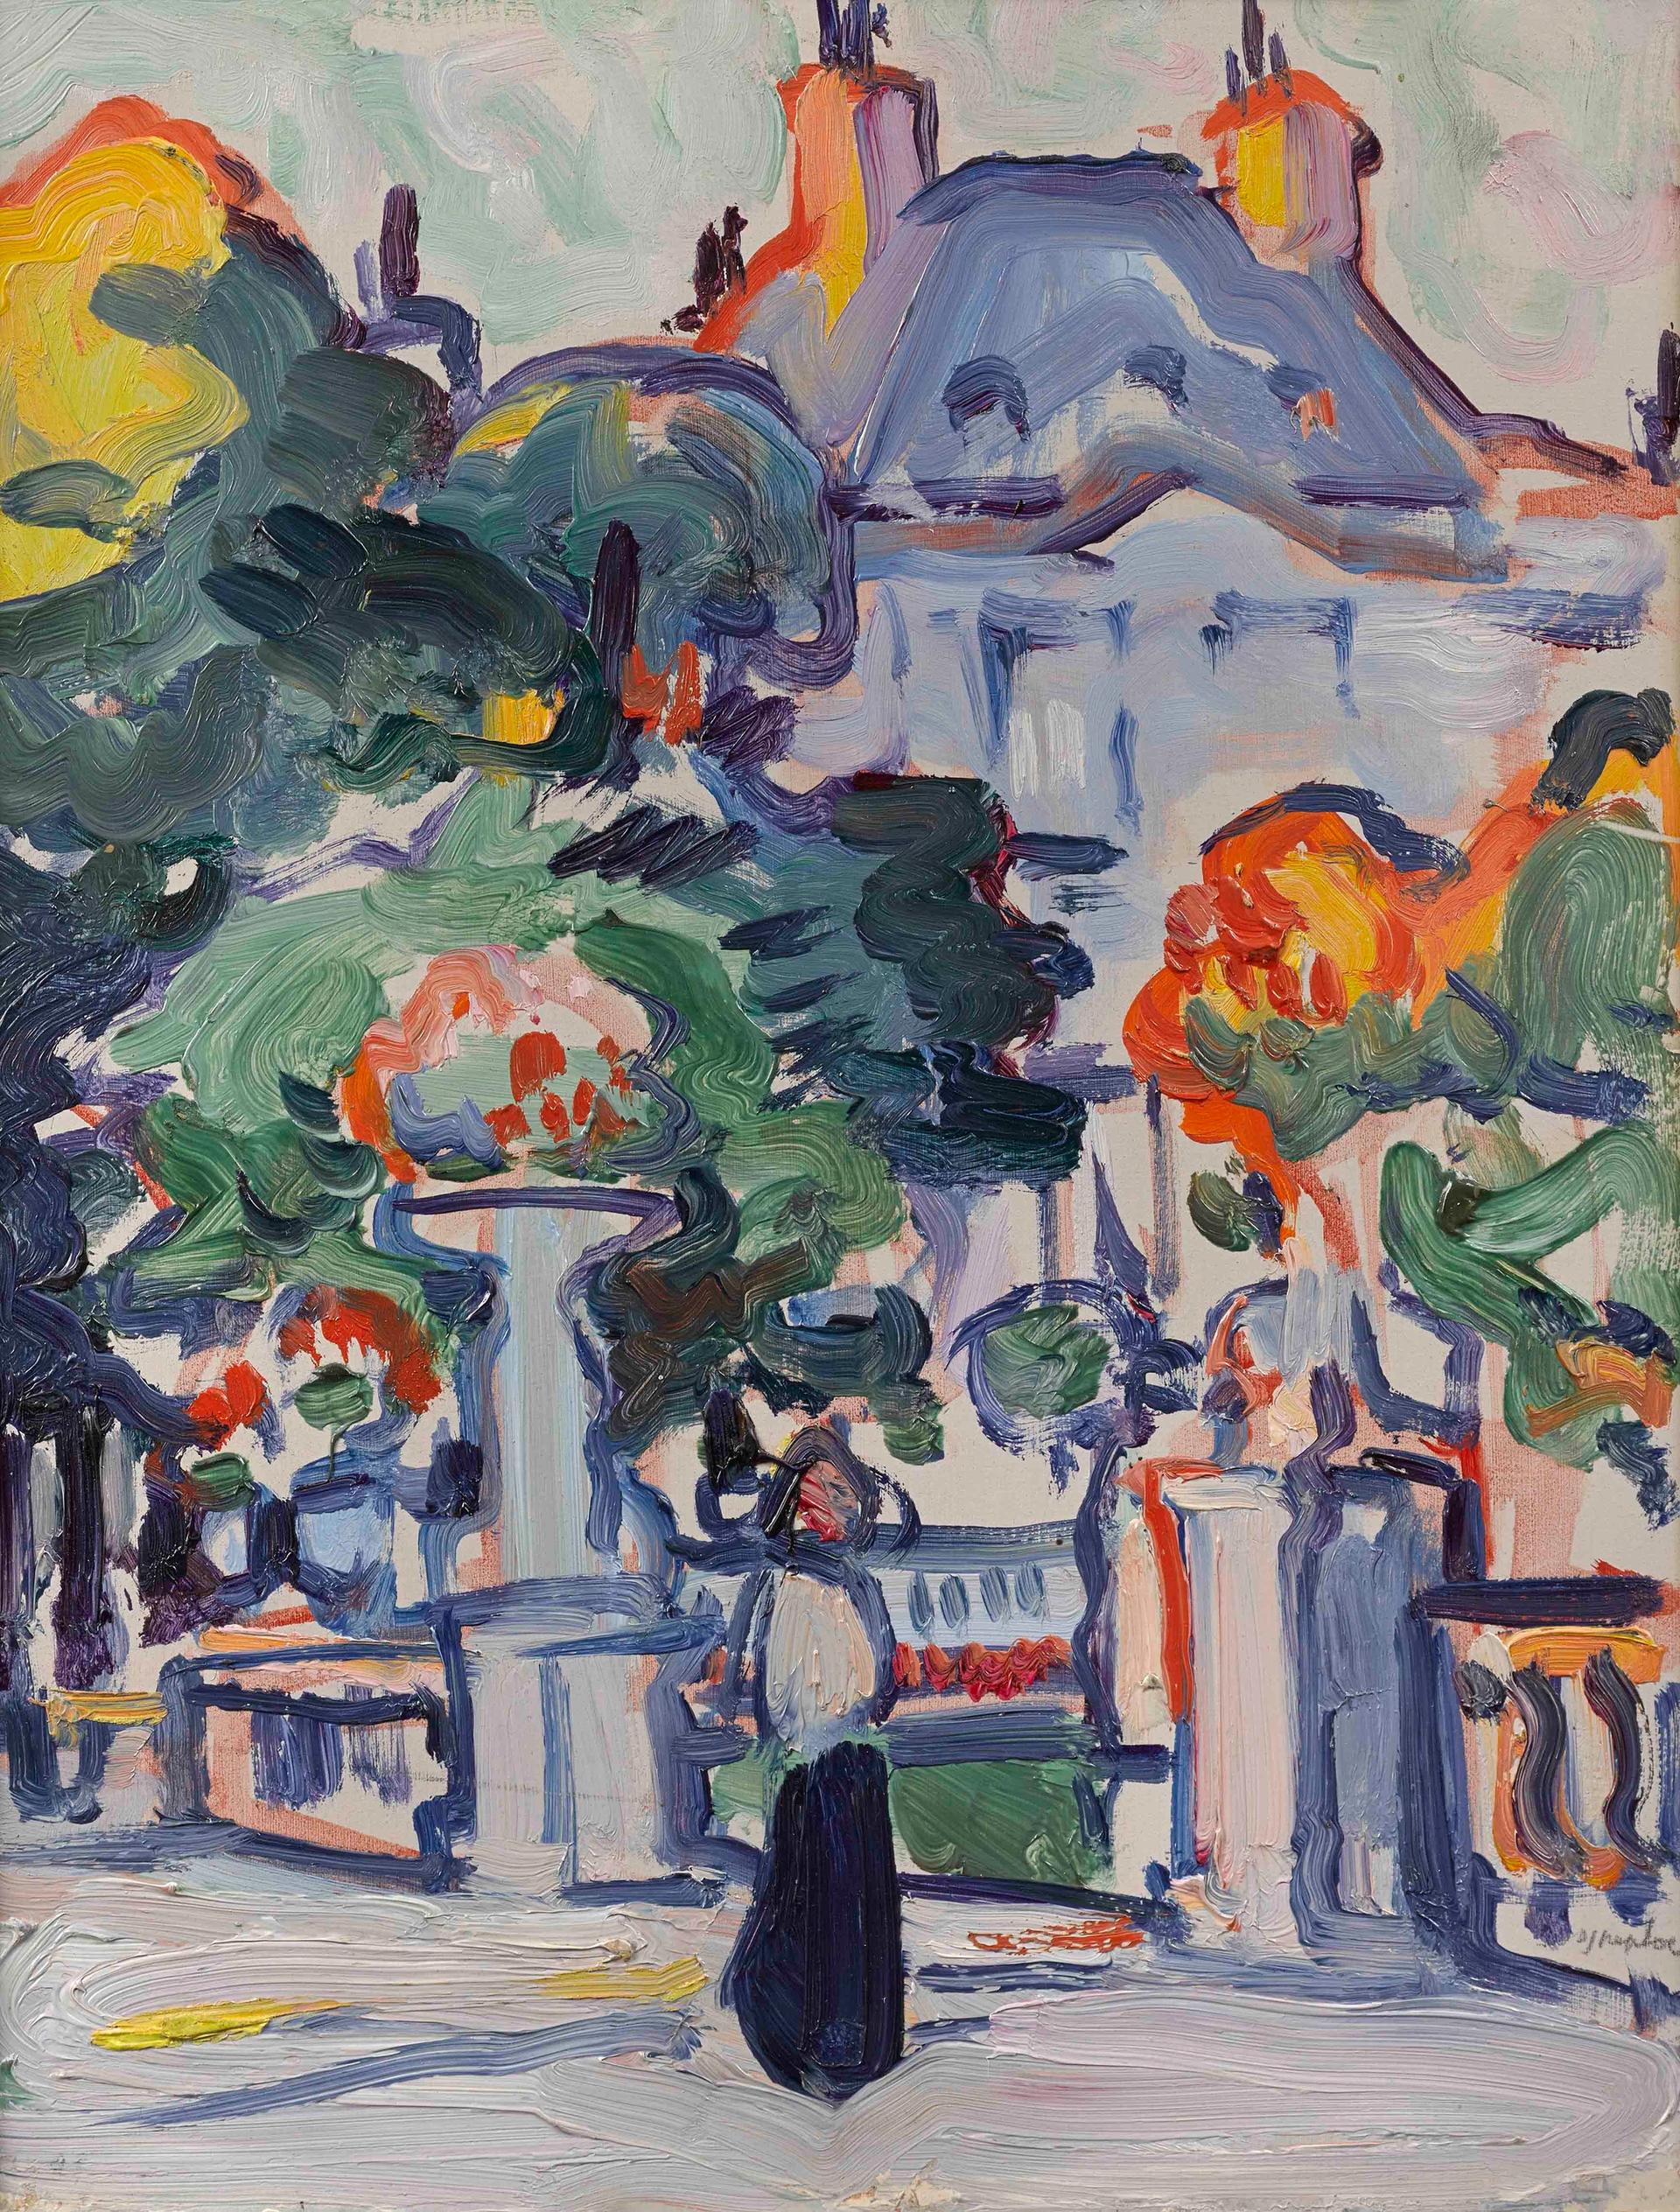 S.J. Peploe, Luxembourg Gardens (around 1910) ©The Fleming Collection